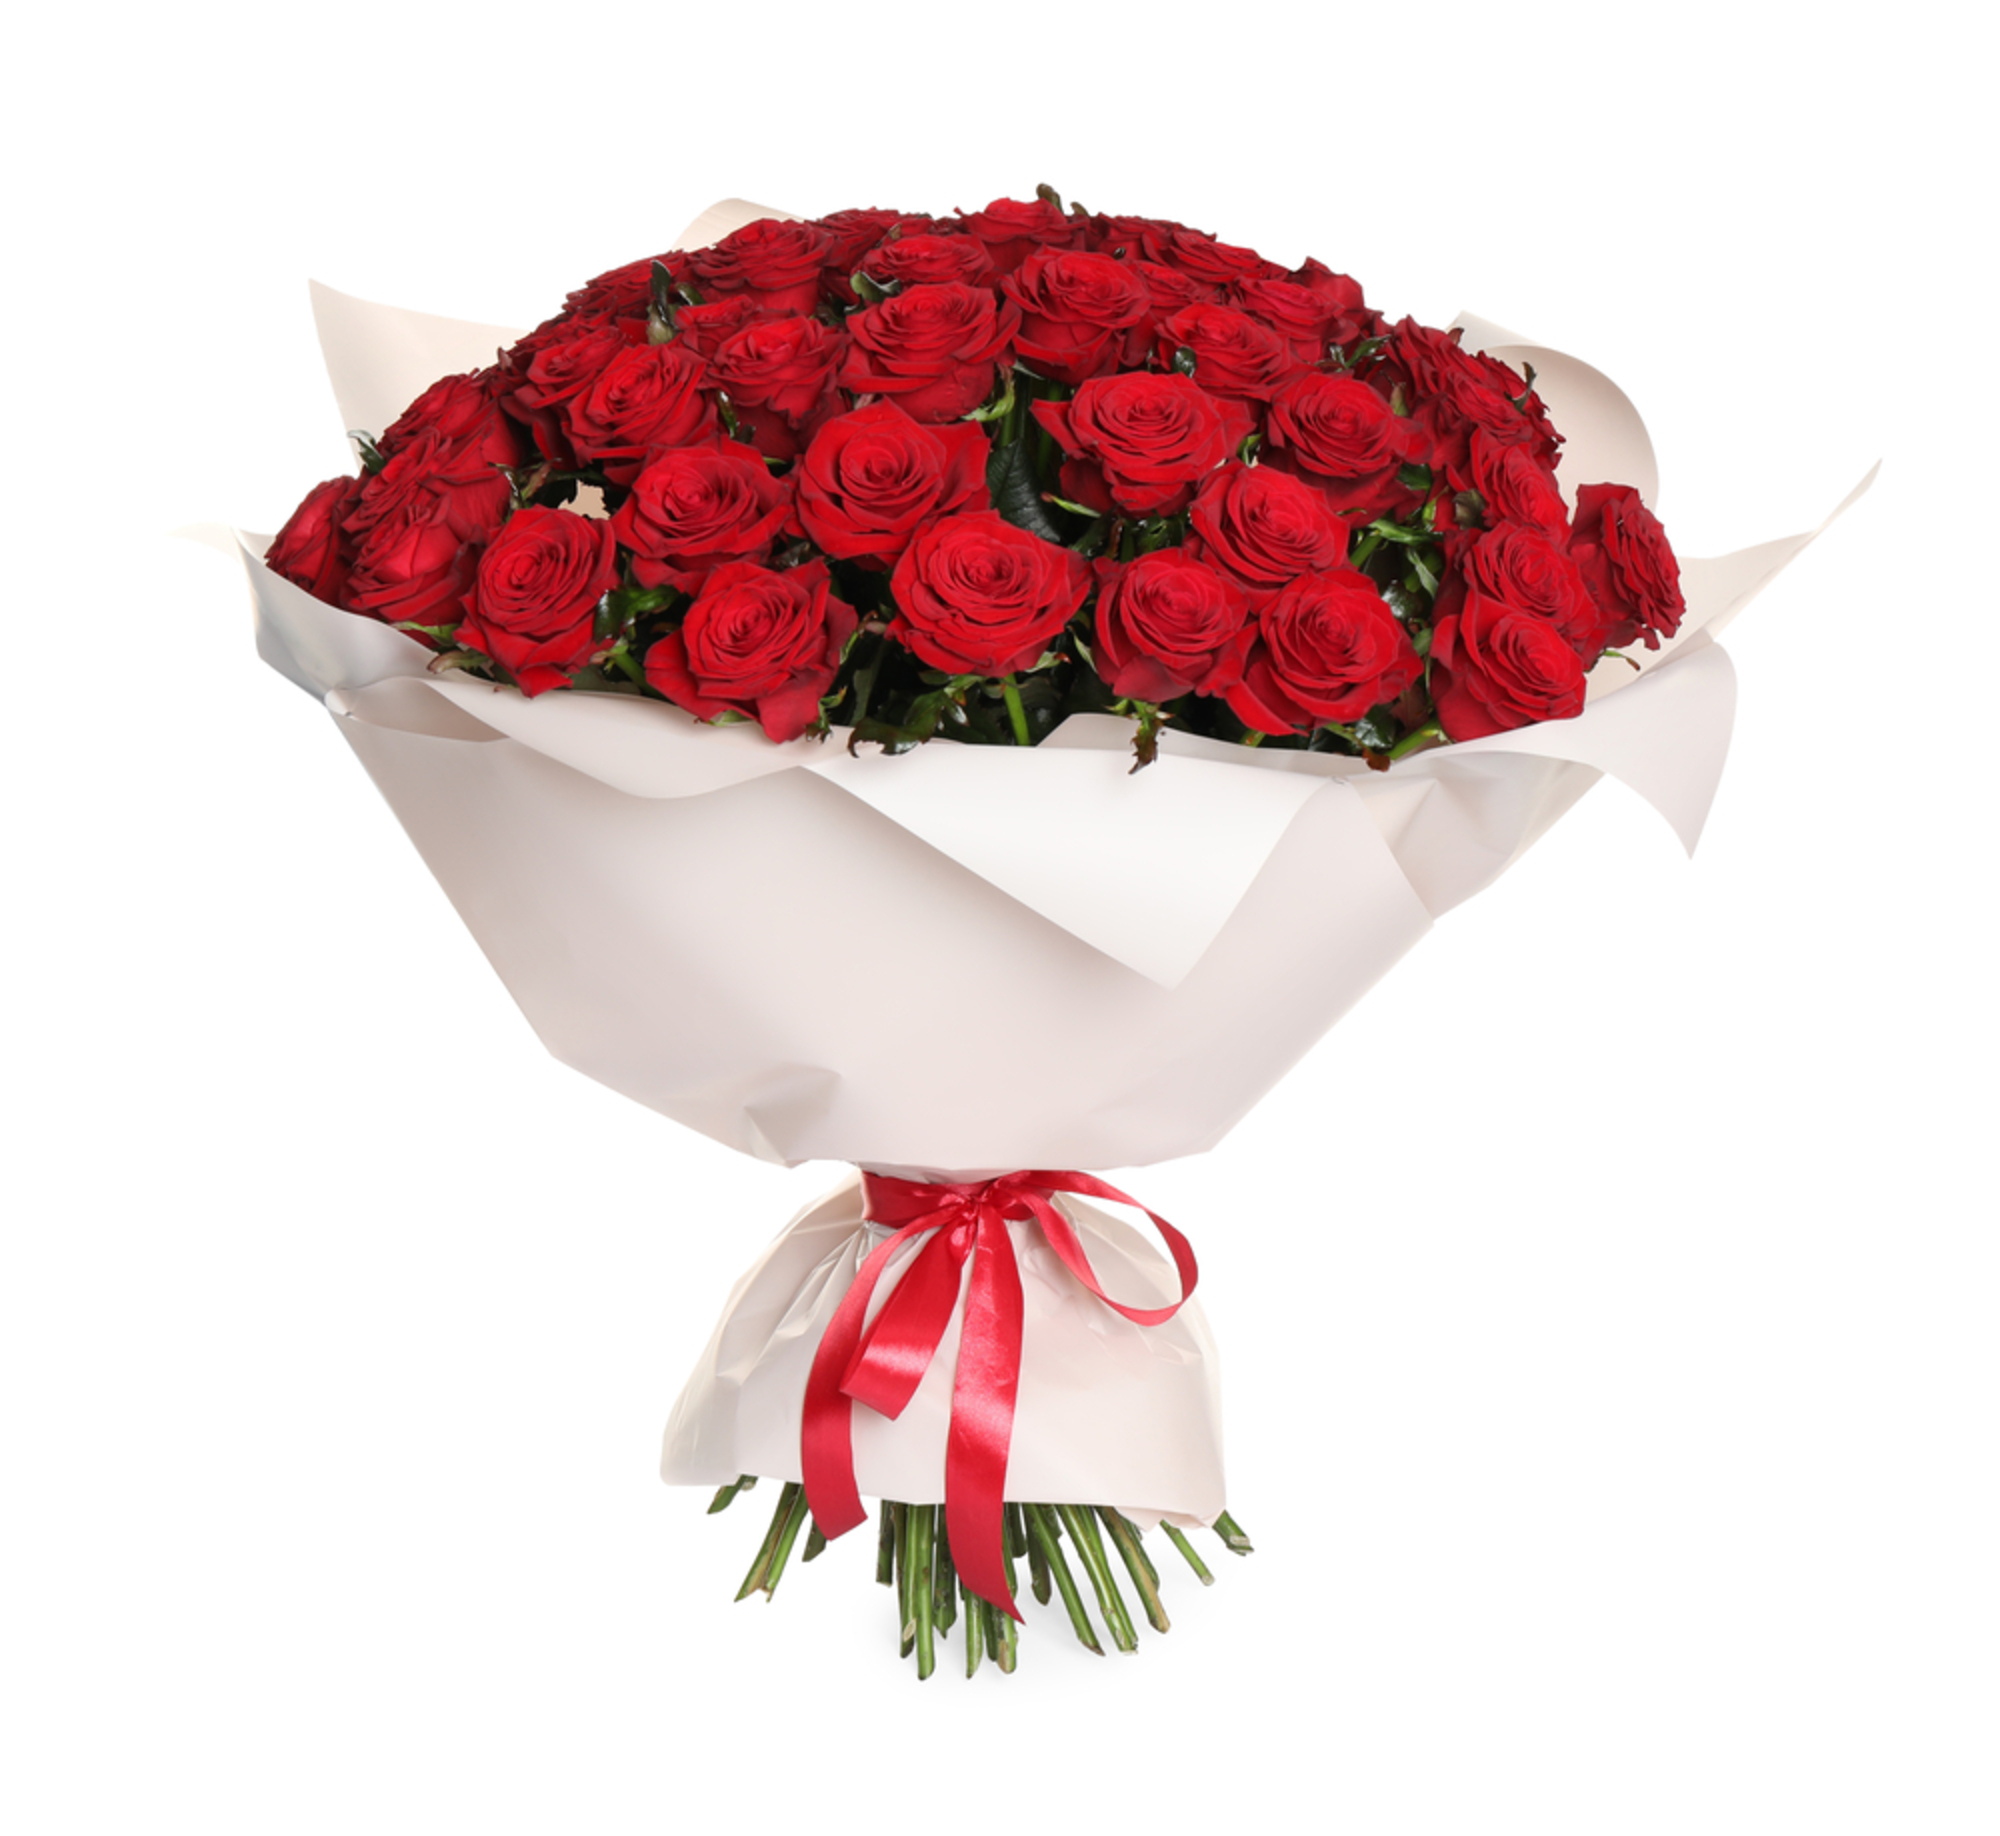 101 Red Roses